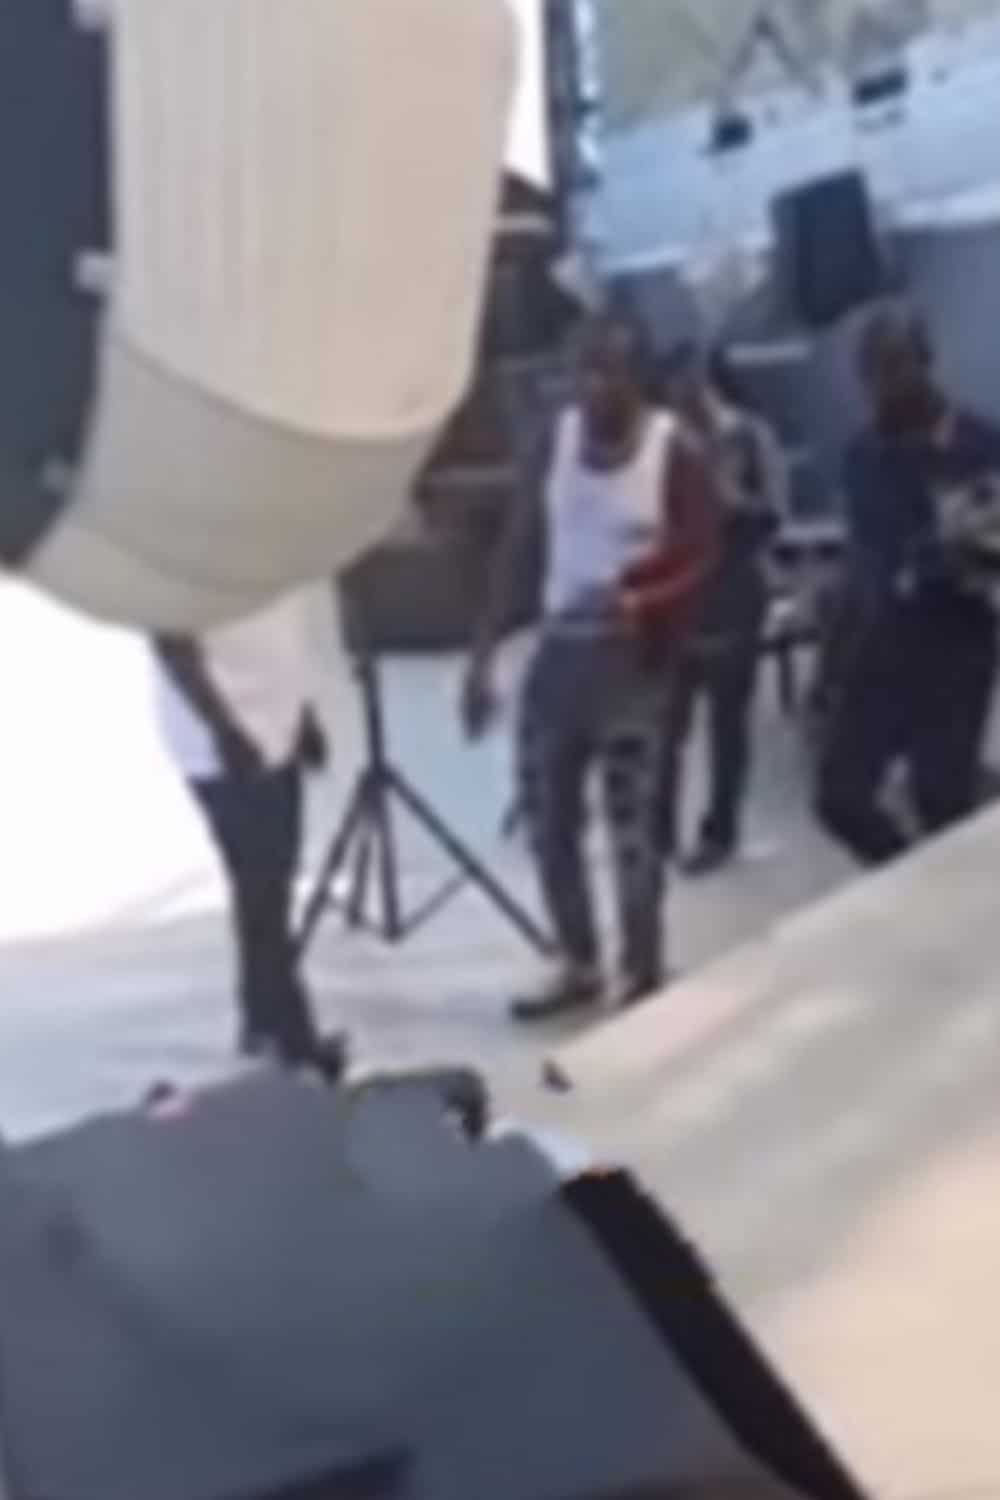 Speed Darlington shouts at director for staring at vixen’s backside during music video shoot